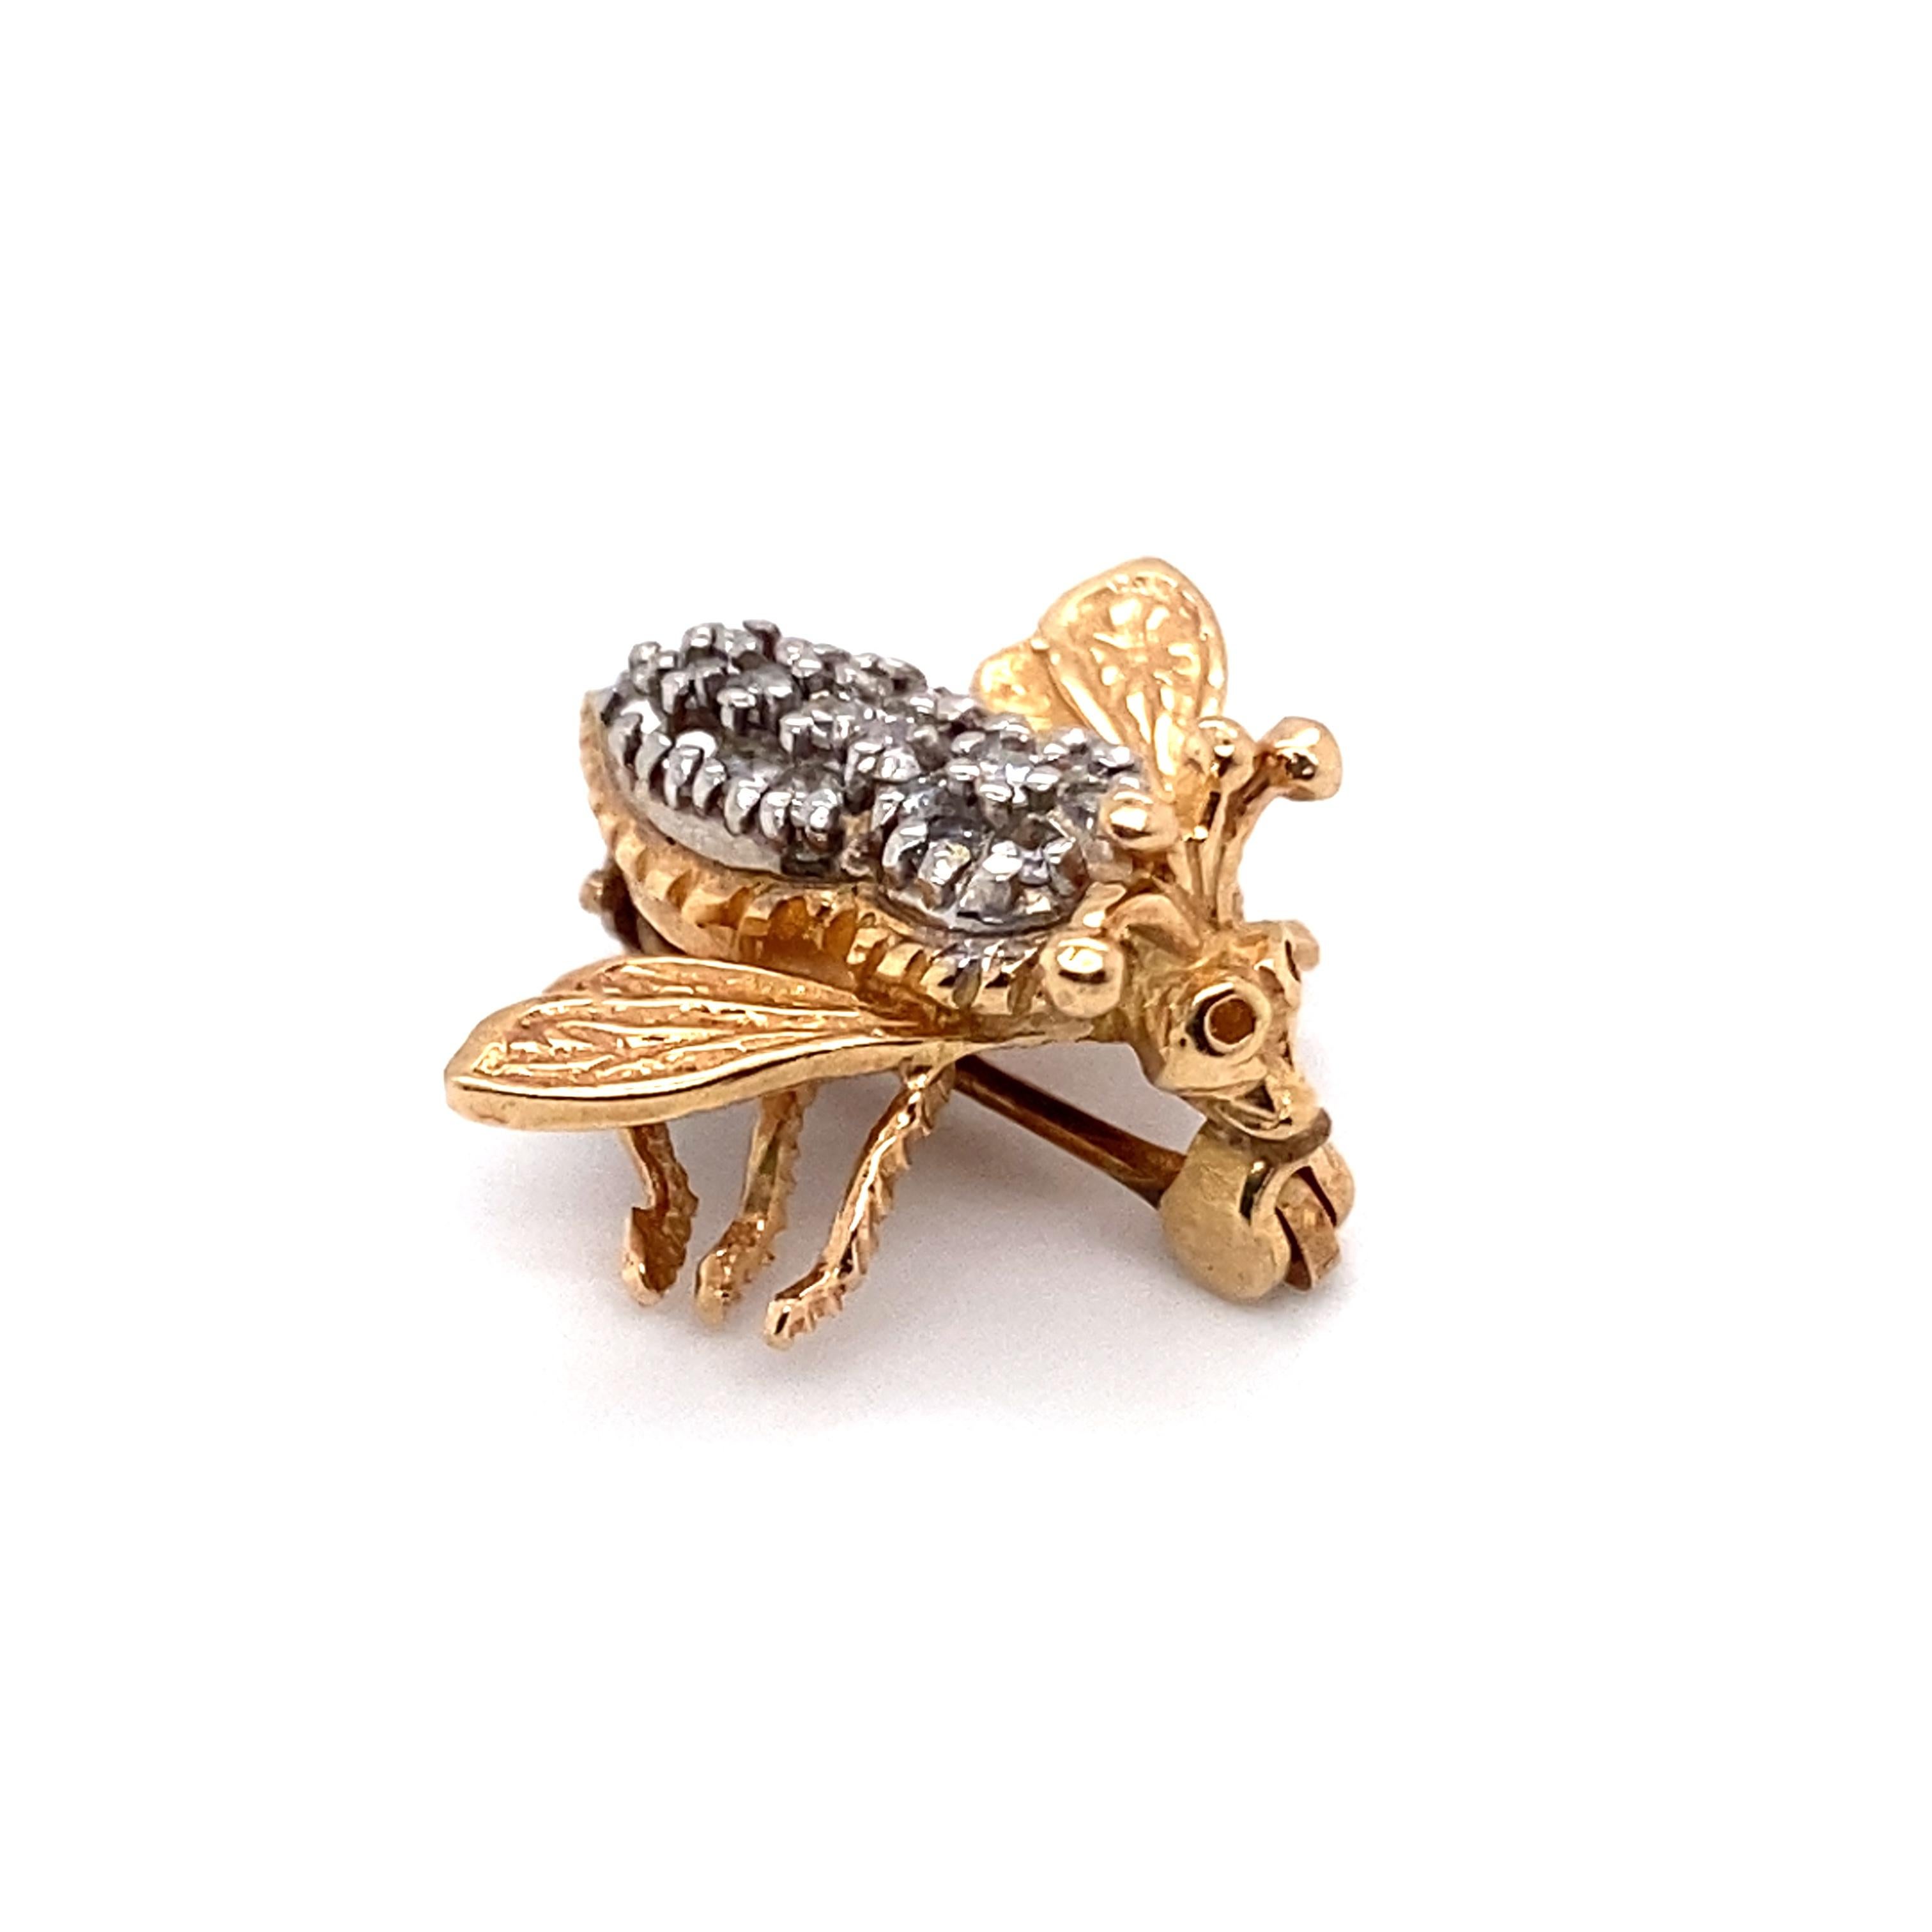 Item Details:
Metal Type: 14 Karat Two Tone Gold
Weight: 3.1 grams
.75 inches height x .75 inches width

Diamond Details:
Cut: Round
Carat: 0.20 carat total weight
Color: G
Clarity: VS

Item Features: 
It features a very life like bee made of 18